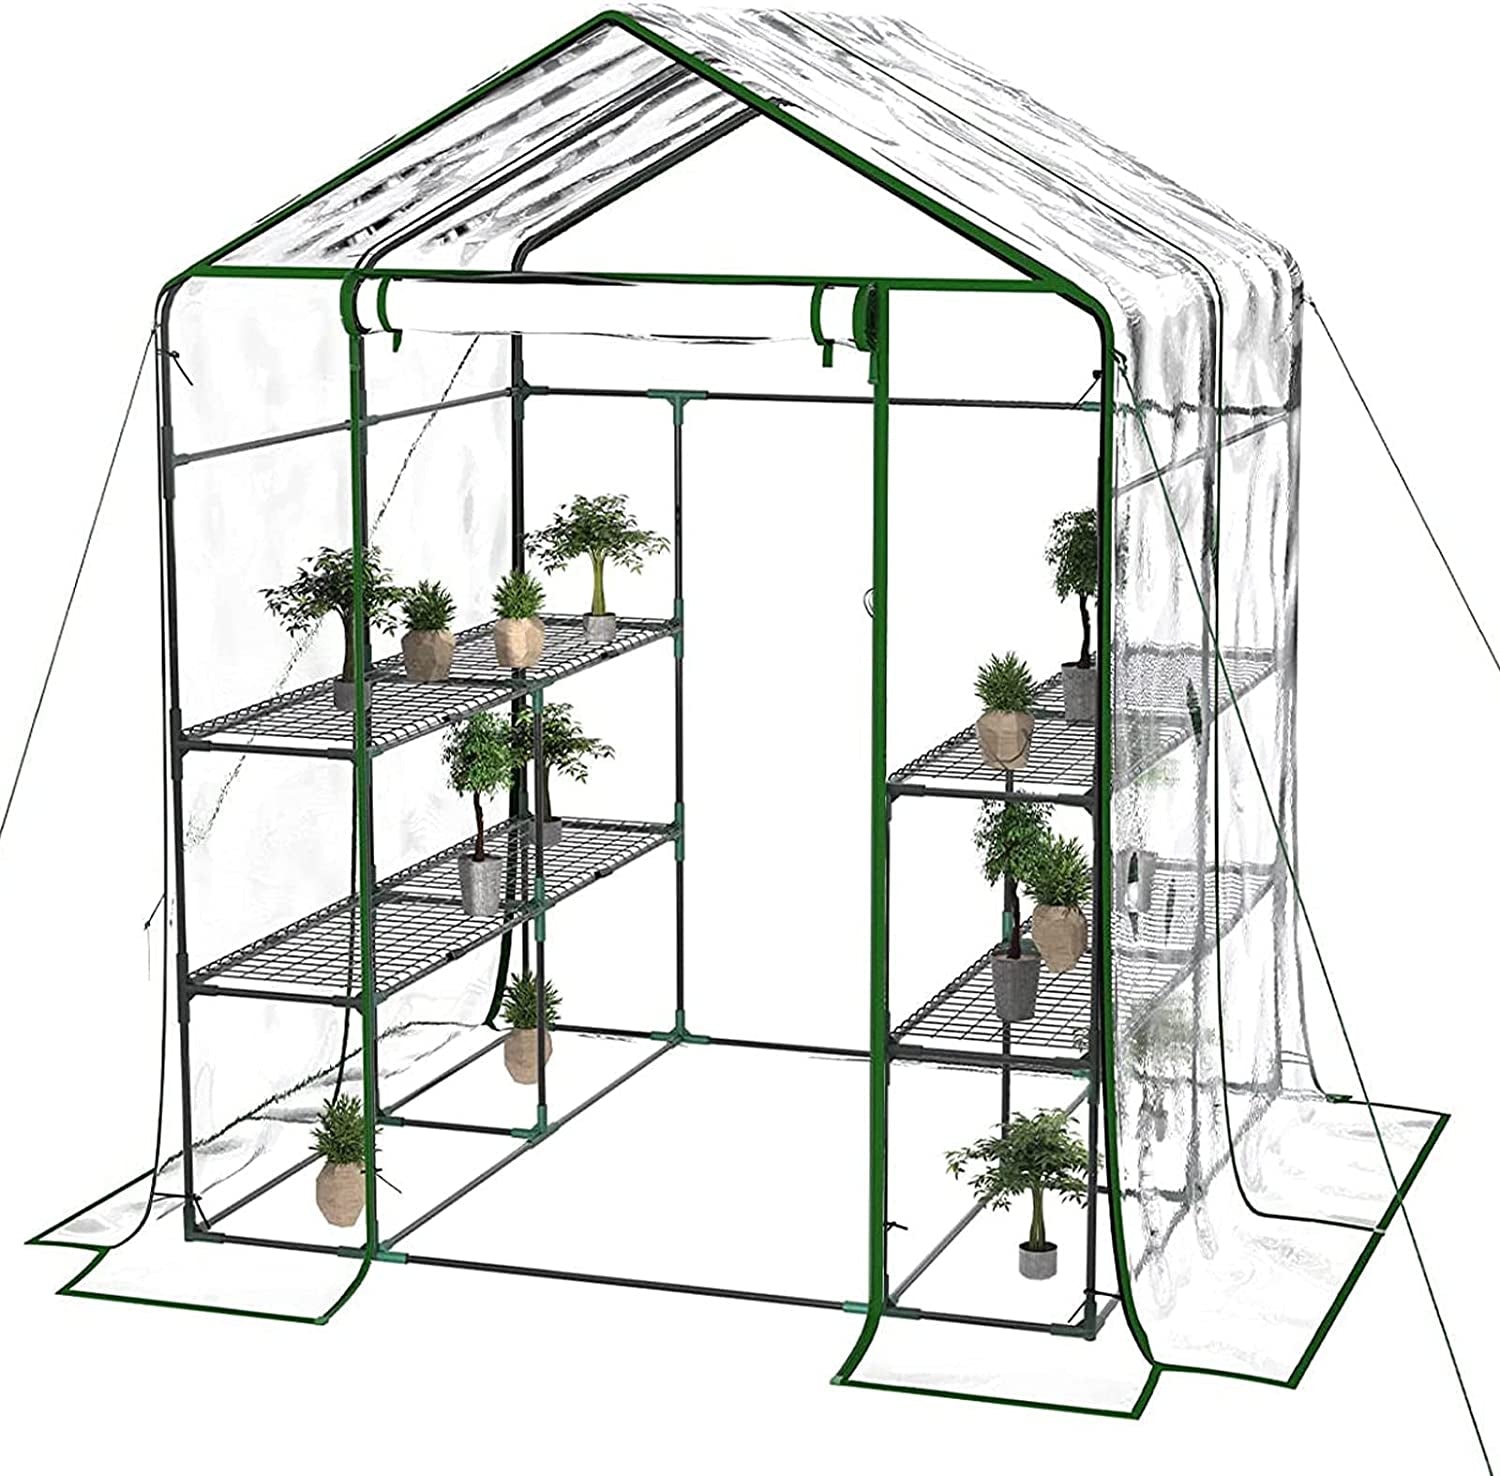  Portable Mini Greenhouse Kit with Anchors and Ropes